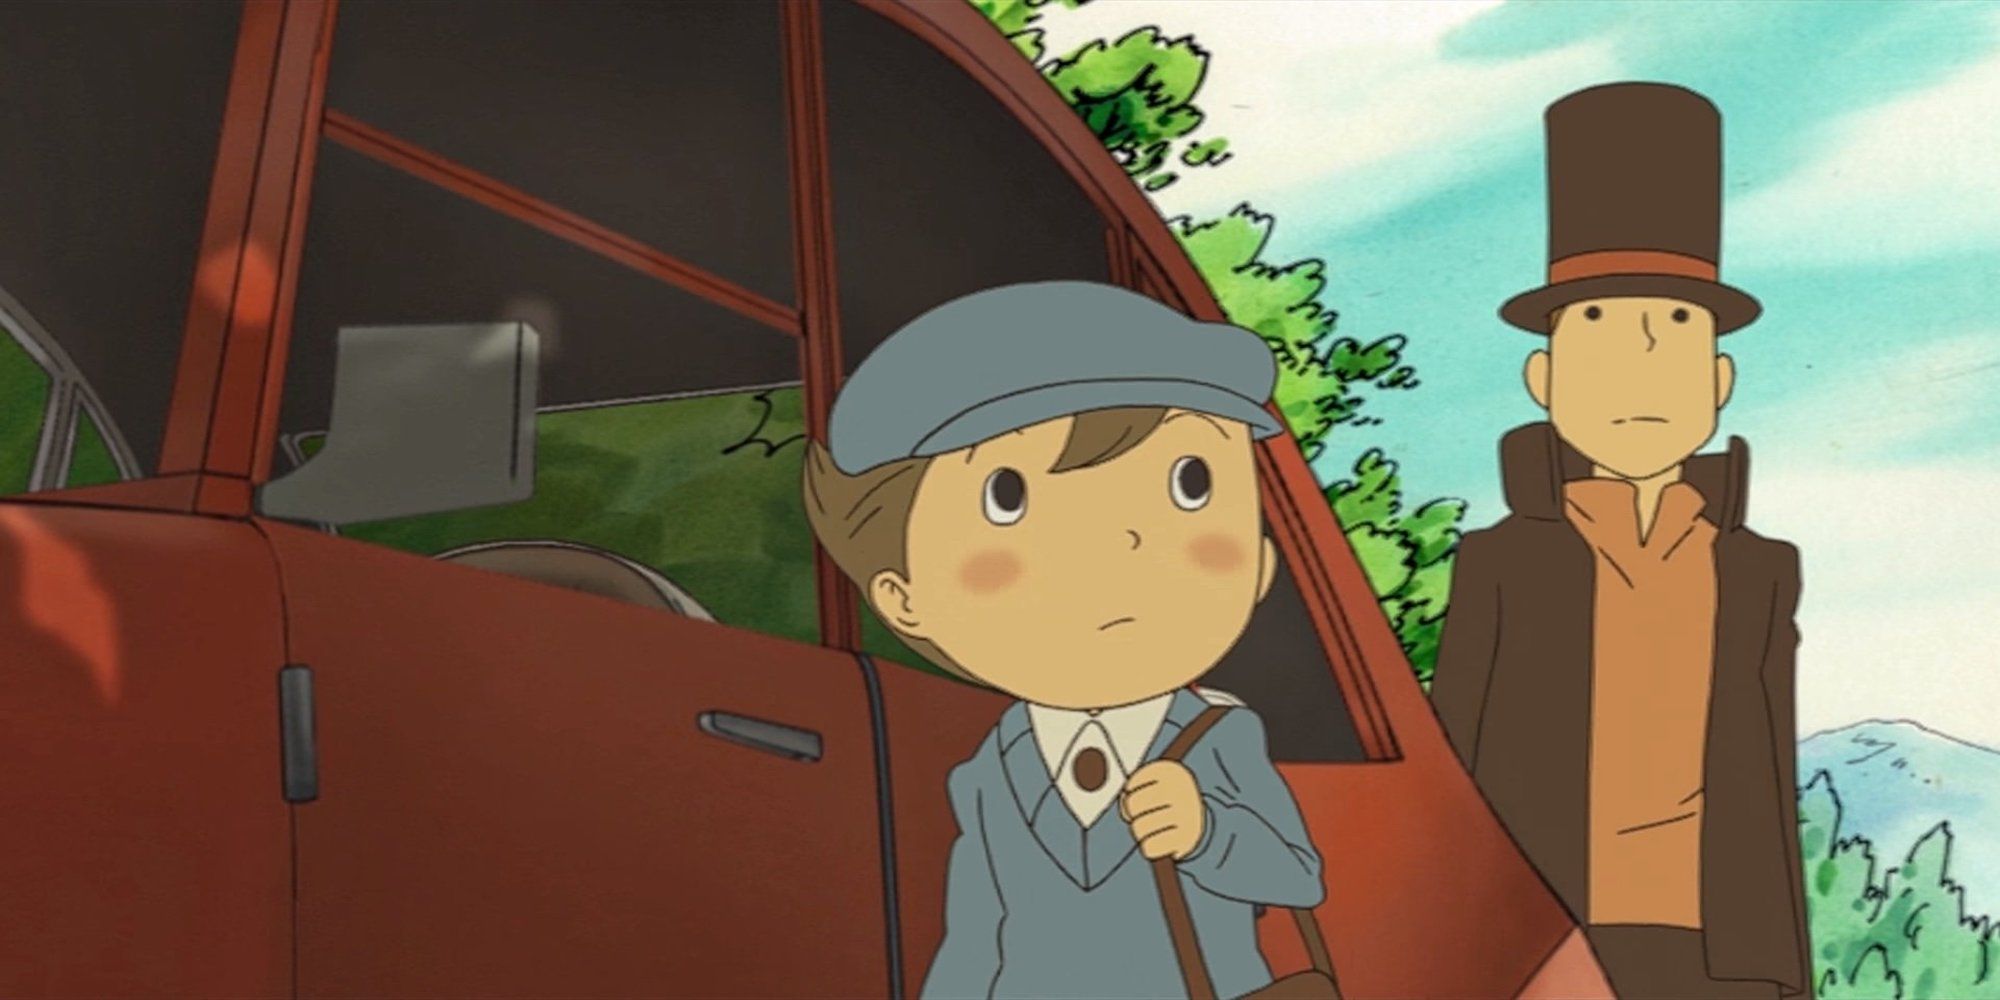 Luke and Proffesor Layton in Professor Layton And The Curious Village